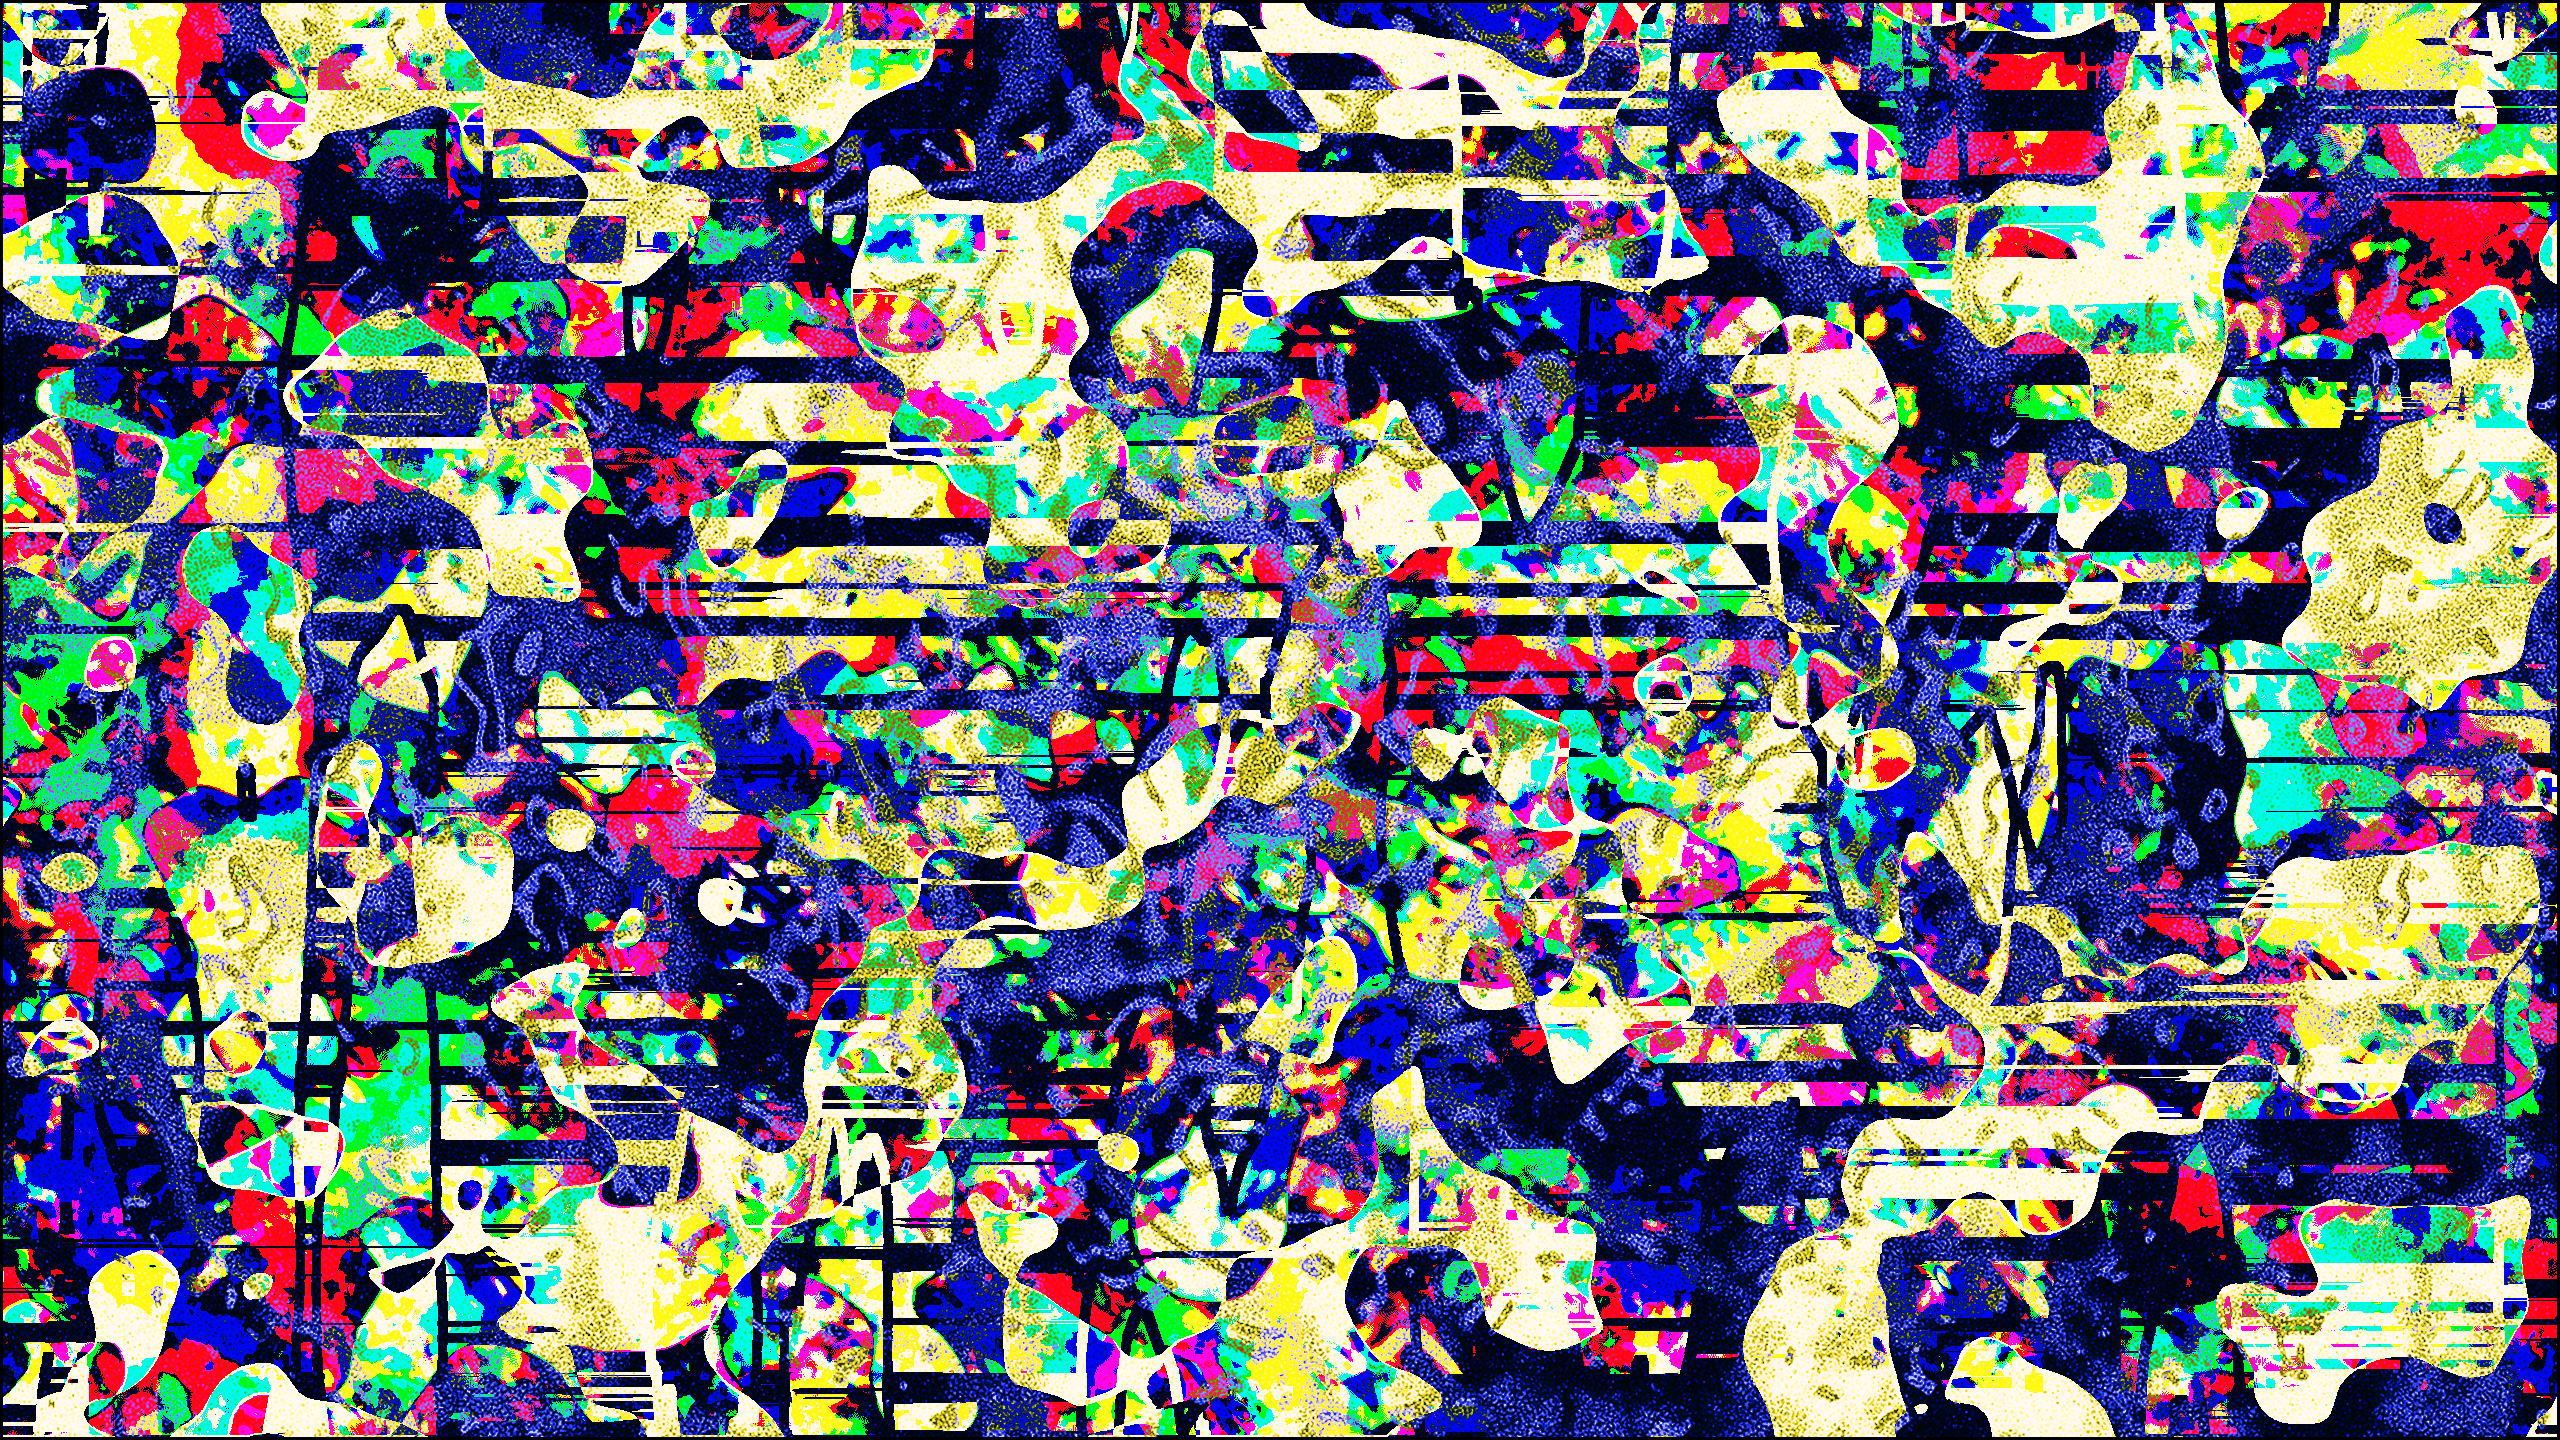 Brightness Abstract Digital Art Trippy Psychedelic 2560x1440